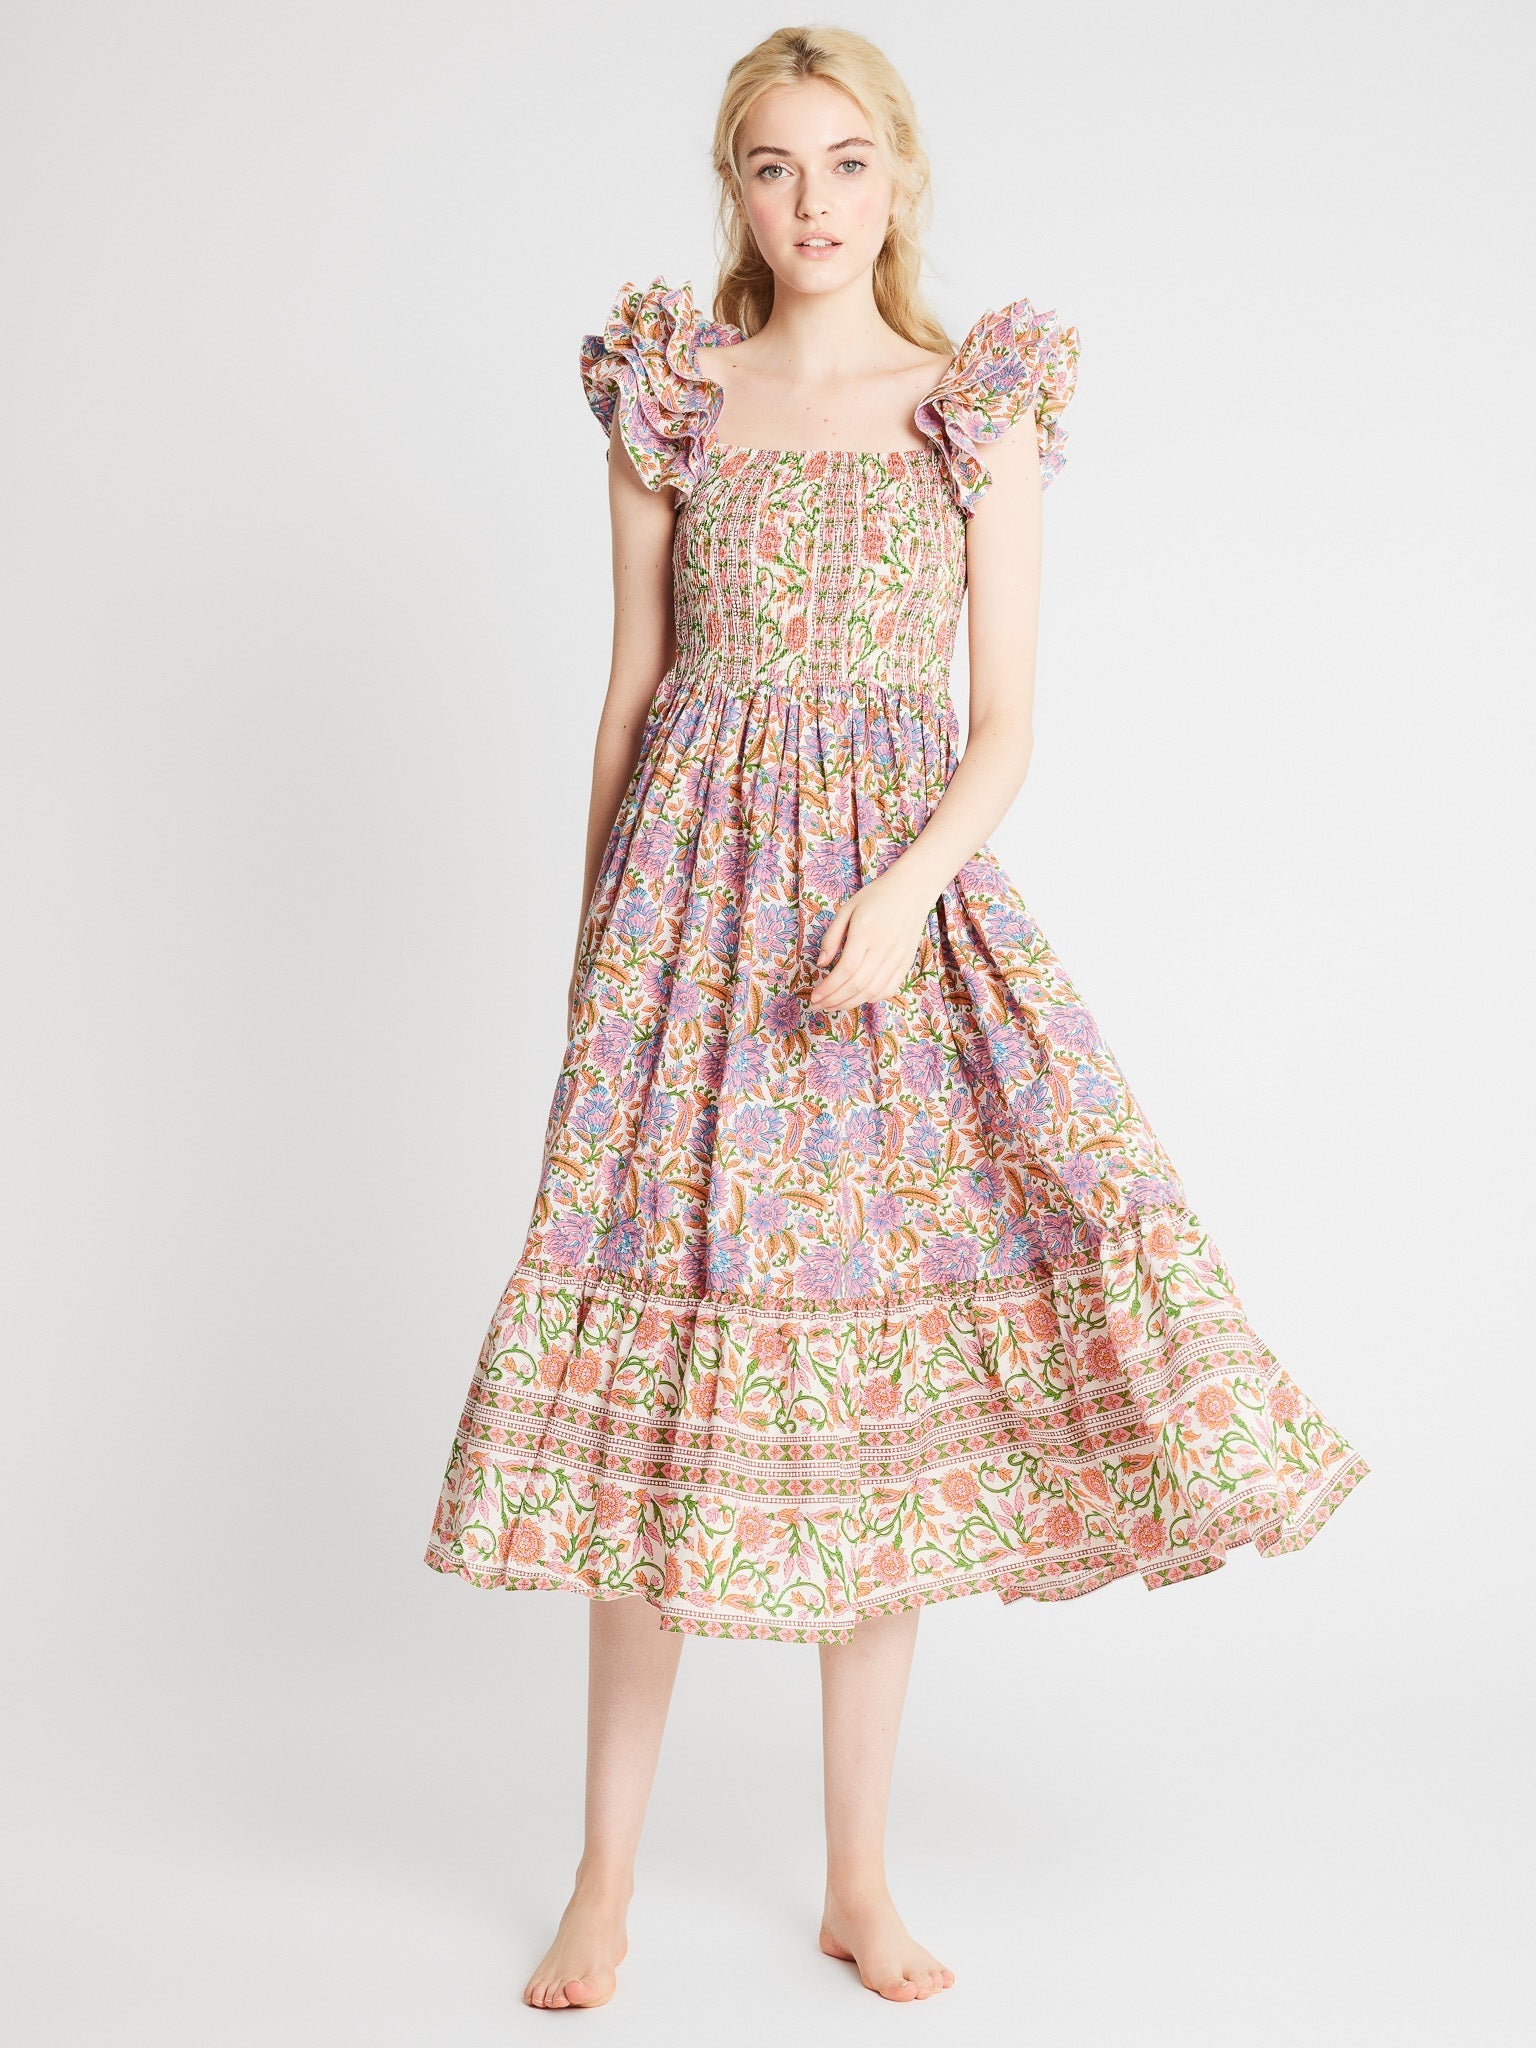 MILLE Clothing Olympia Dress in Avignon Floral